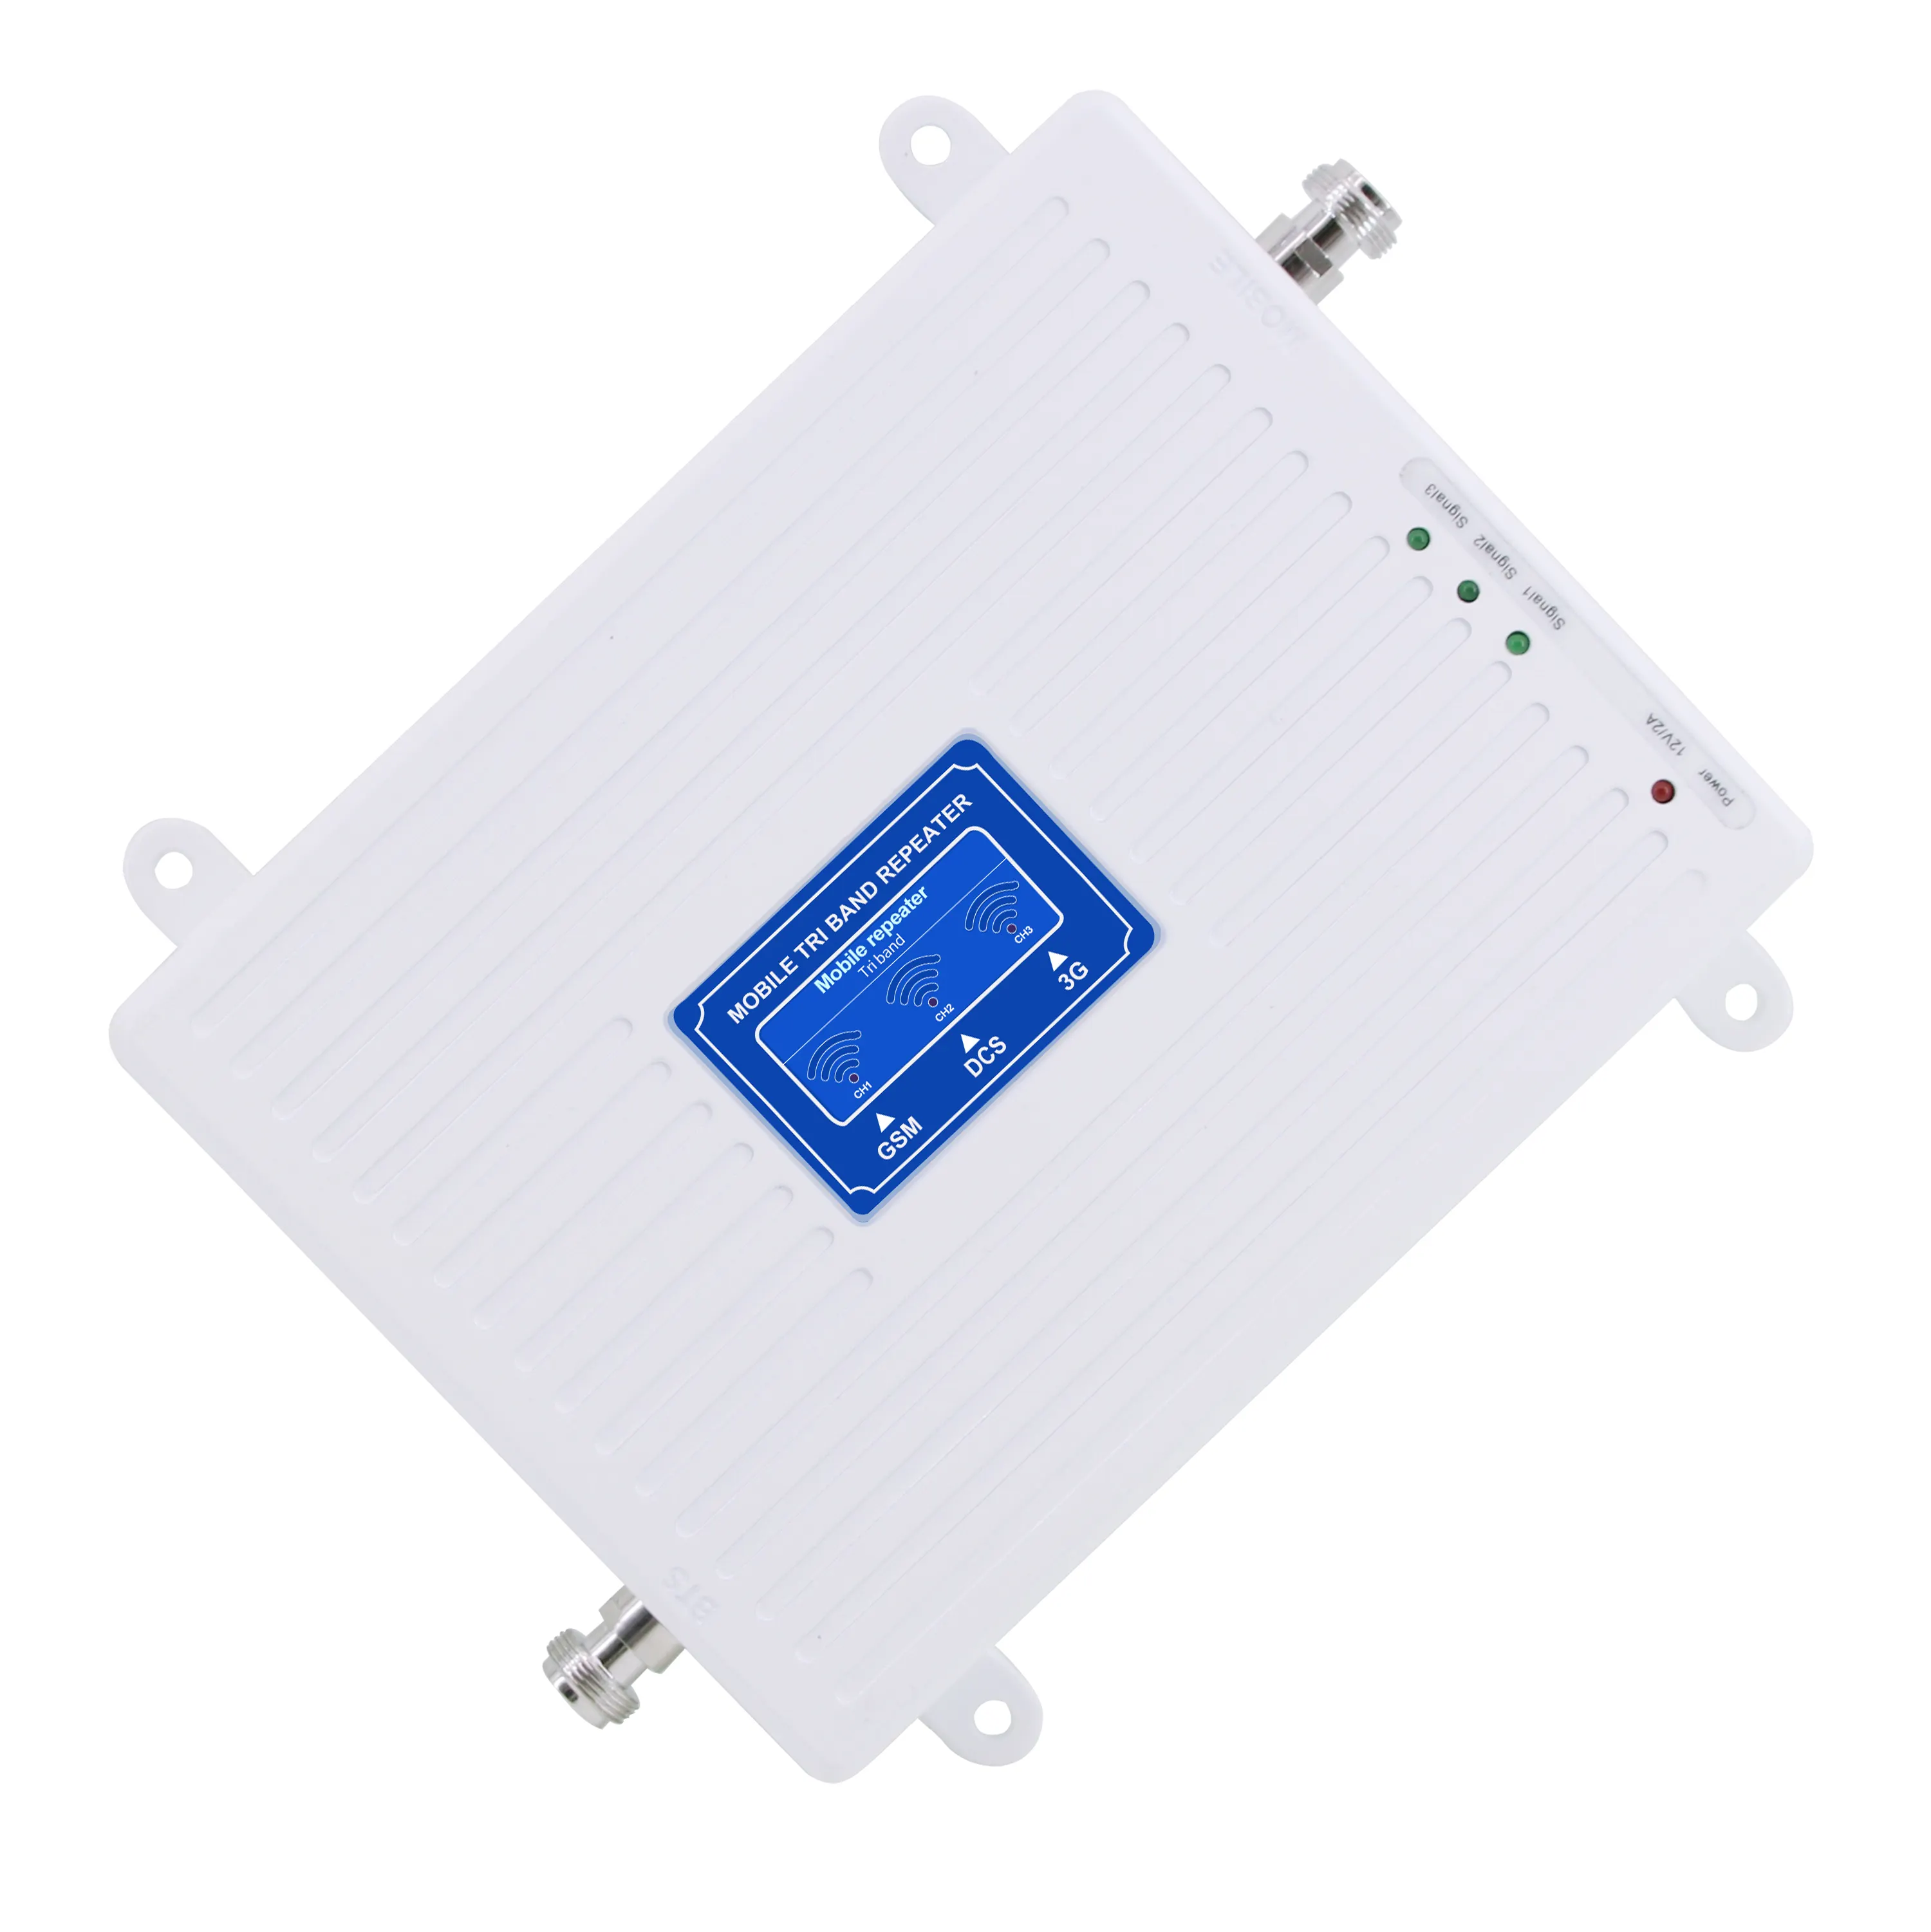 Tri-band 2g 3g 4g 5G Mobile Signal Booster 900/1800/2100mhz LTE Repeater